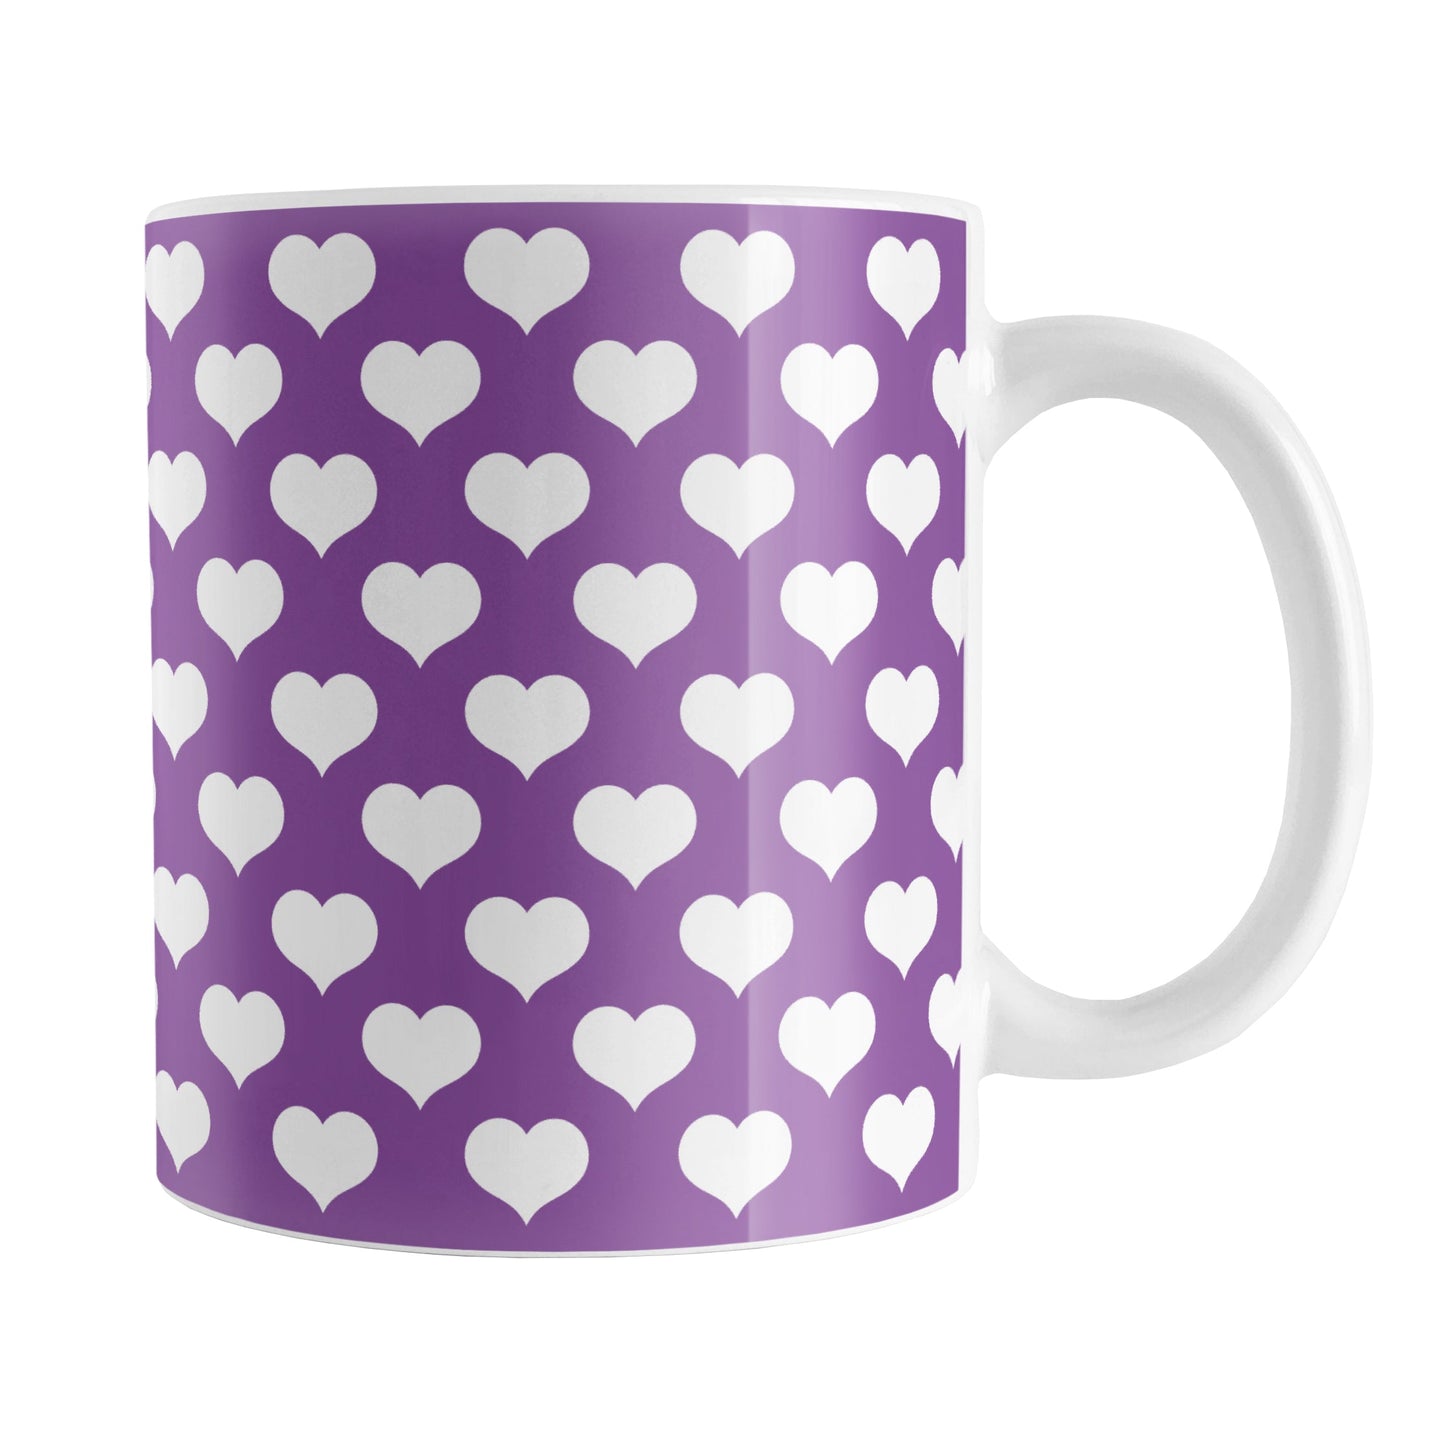 White Hearts Pattern Purple Mug (11oz) at Amy's Coffee Mugs. A ceramic coffee mug designed with white hearts in a polka-dotted style pattern over a purple background color that wraps around the mug up to the handle.